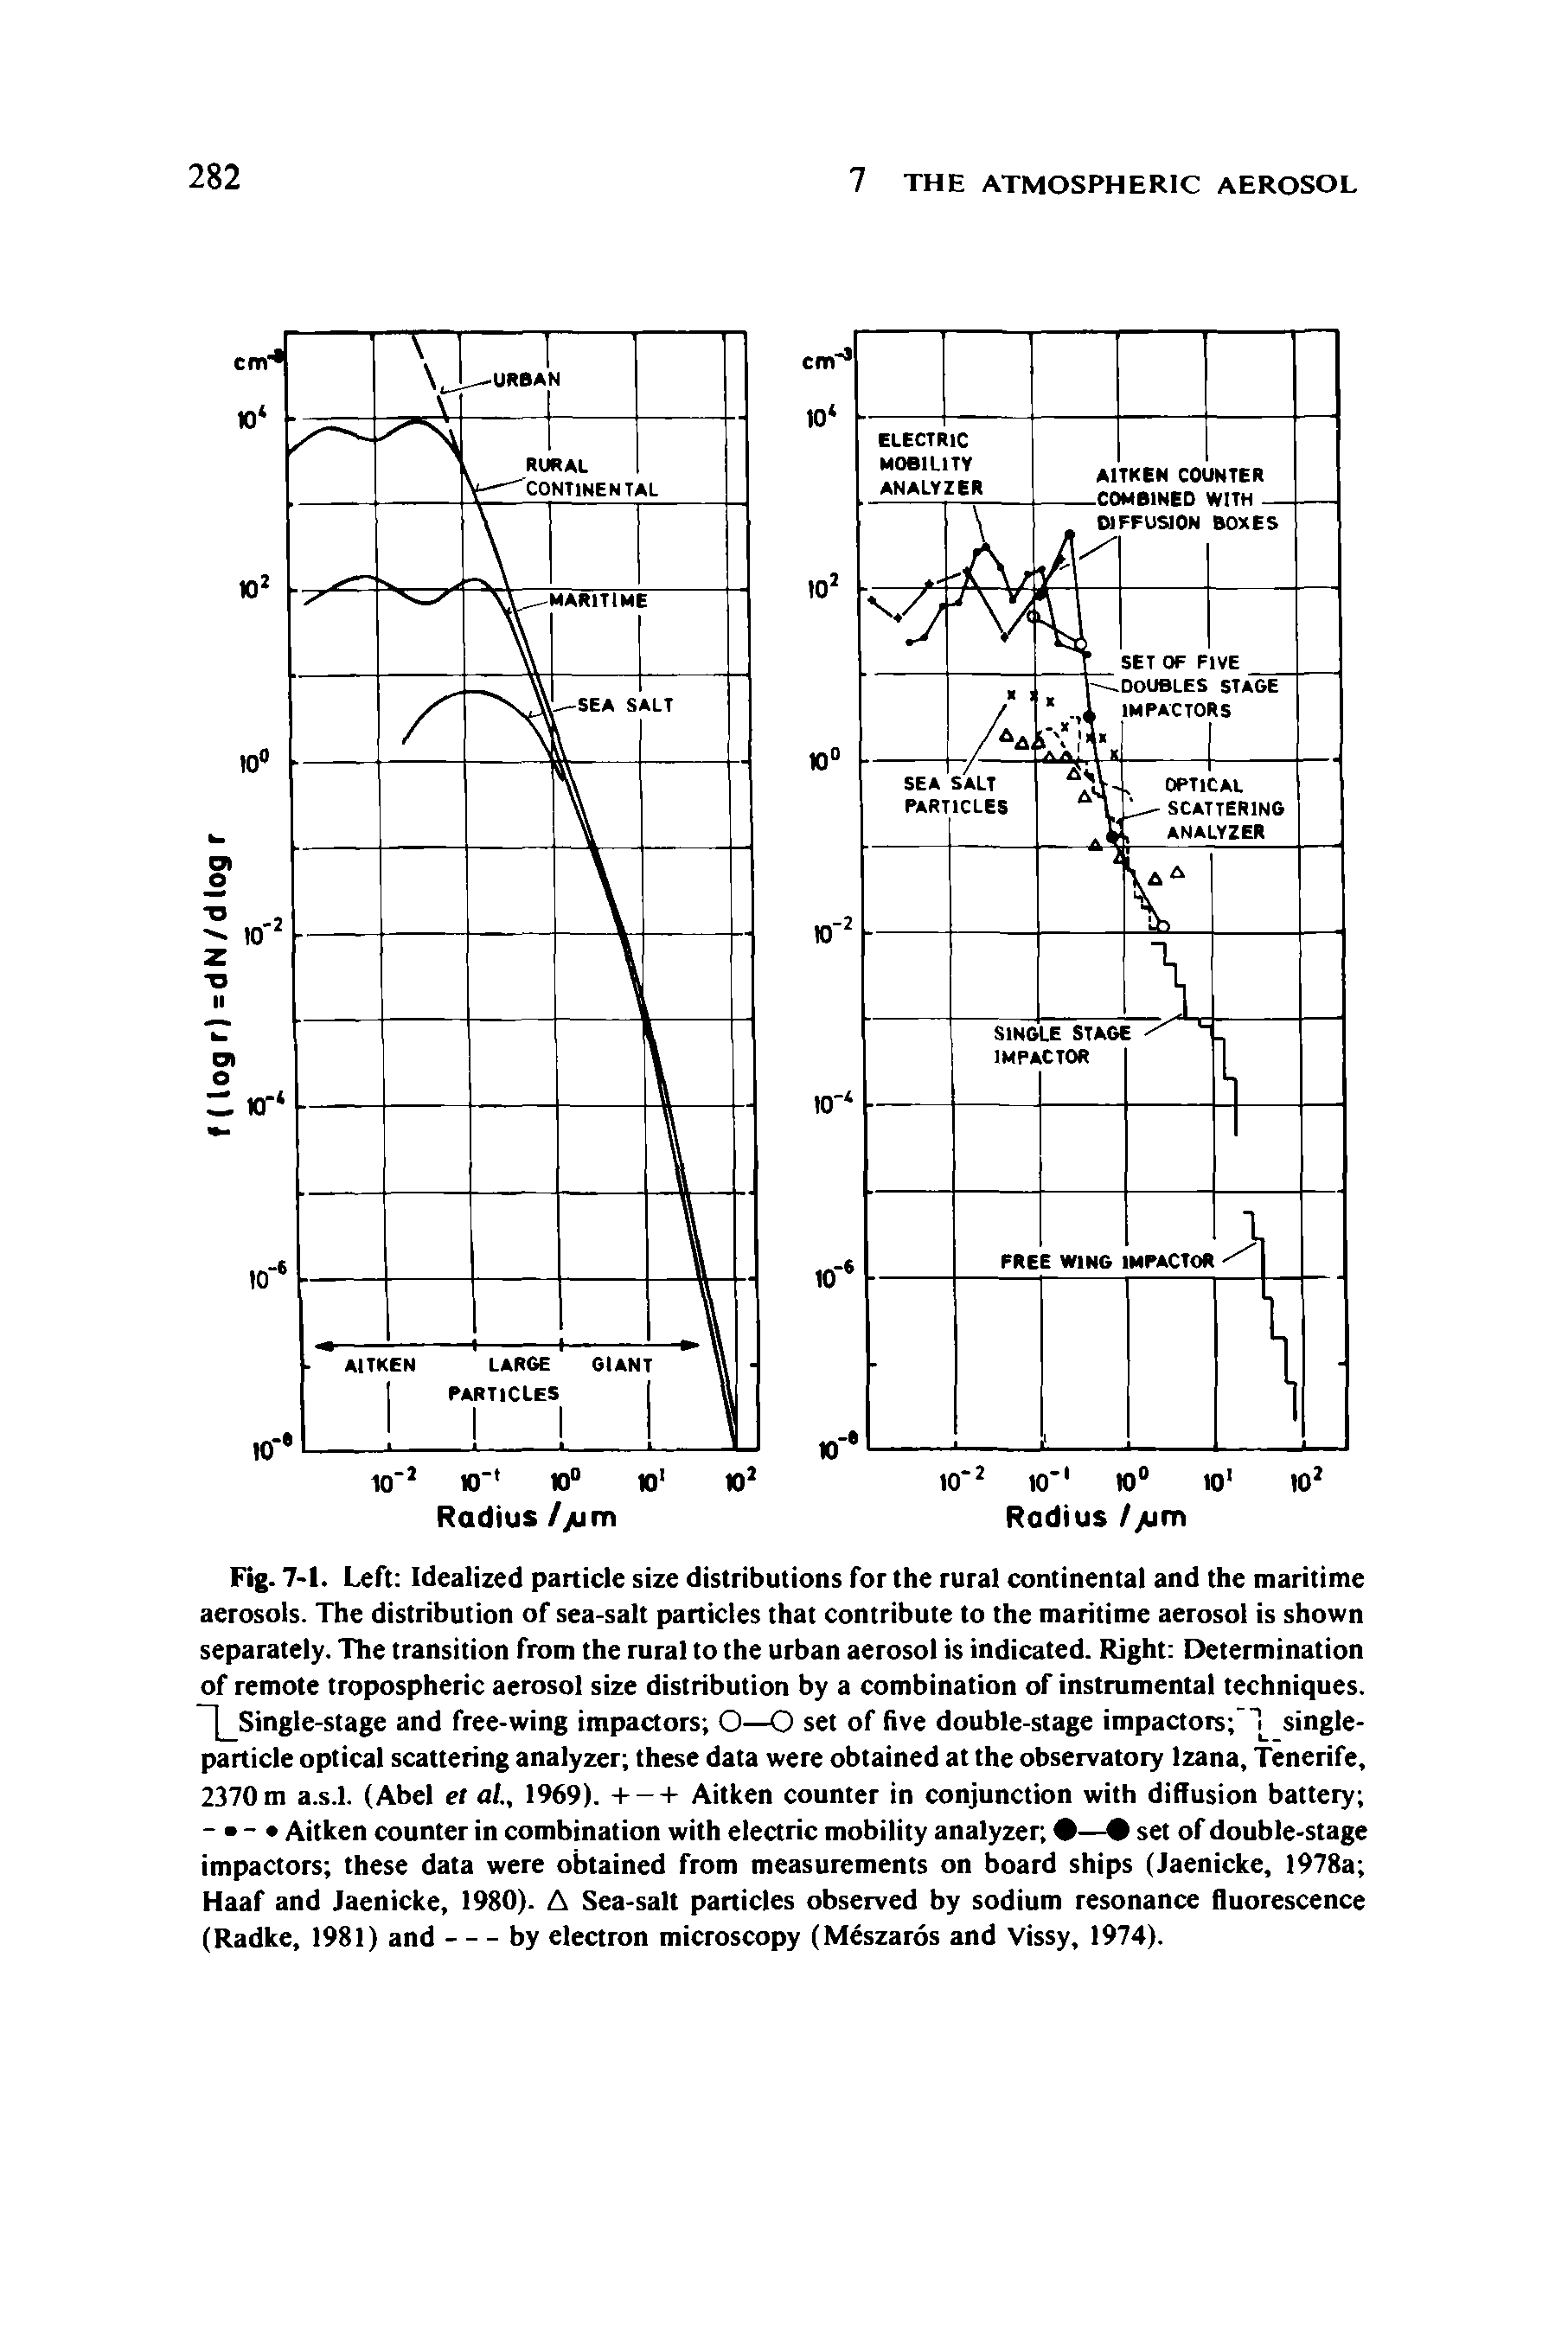 Fig. 7-1. Left Idealized particle size distributions for the rural continental and the maritime aerosols. The distribution of sea-salt particles that contribute to the maritime aerosol is shown separately. The transition from the rural to the urban aerosol is indicated. Right Determination of remote tropospheric aerosol size distribution by a combination of instrumental techniques. [ Single-stage and free-wing impactors, O—O set of five double-stage impactors singleparticle optical scattering analyzer these data were obtained at the observatory lzana, Tenerife,...